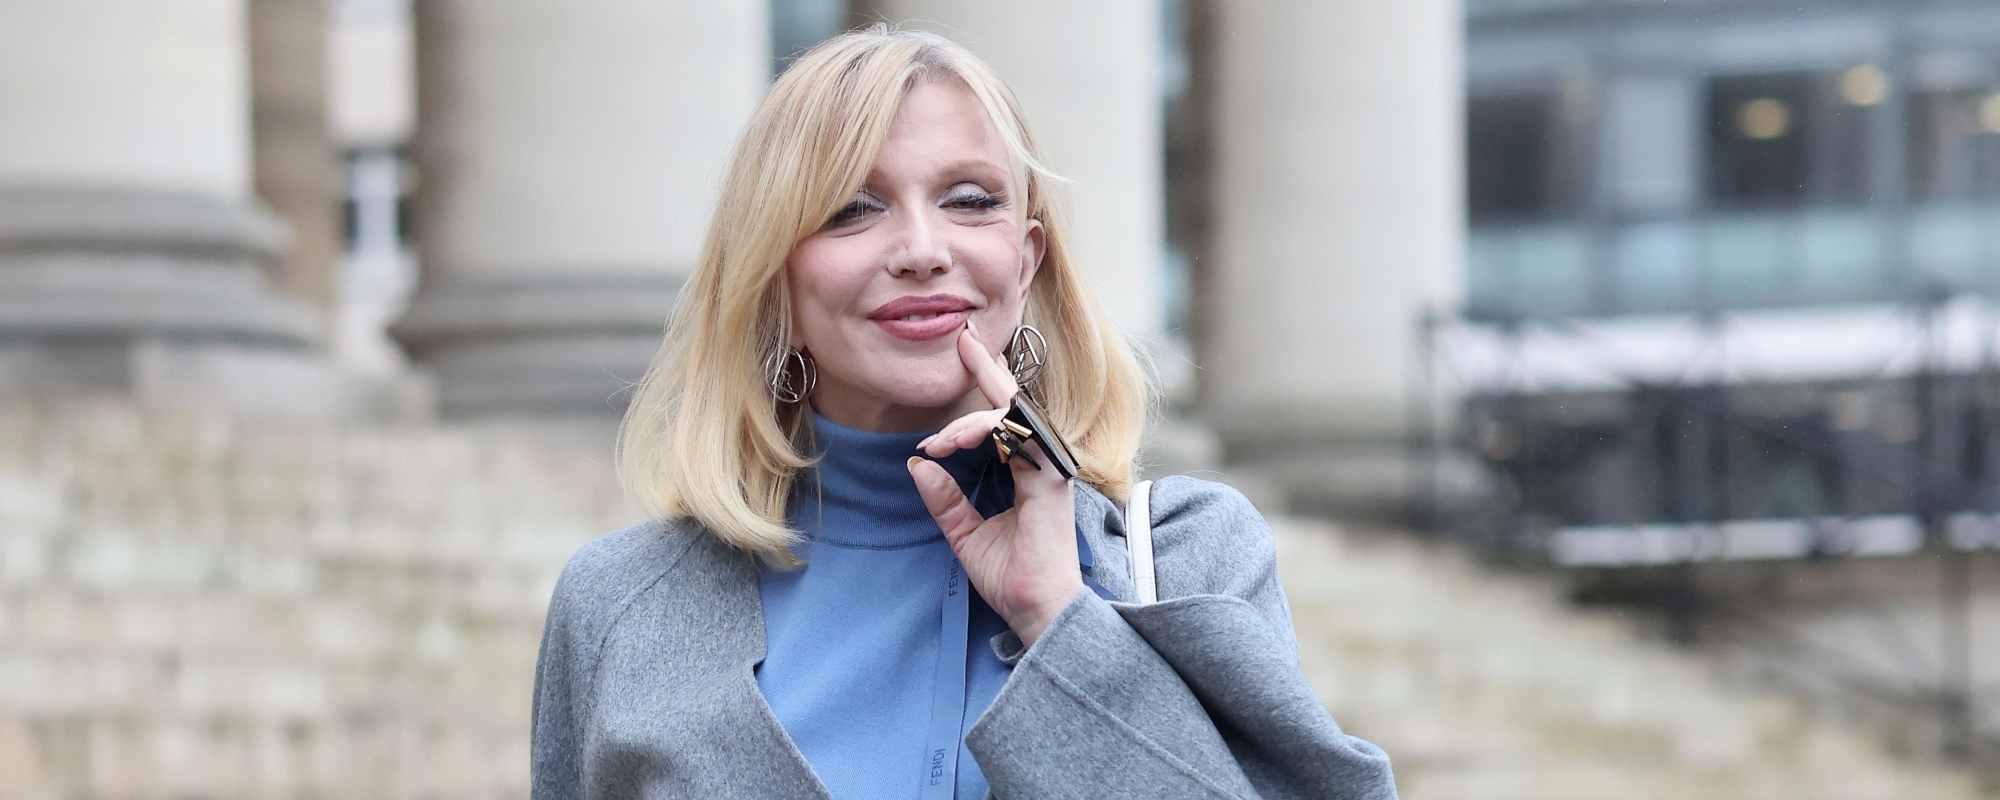 Courtney Love to Reflect on Inspirational Women in Music for New BBC Radio Series